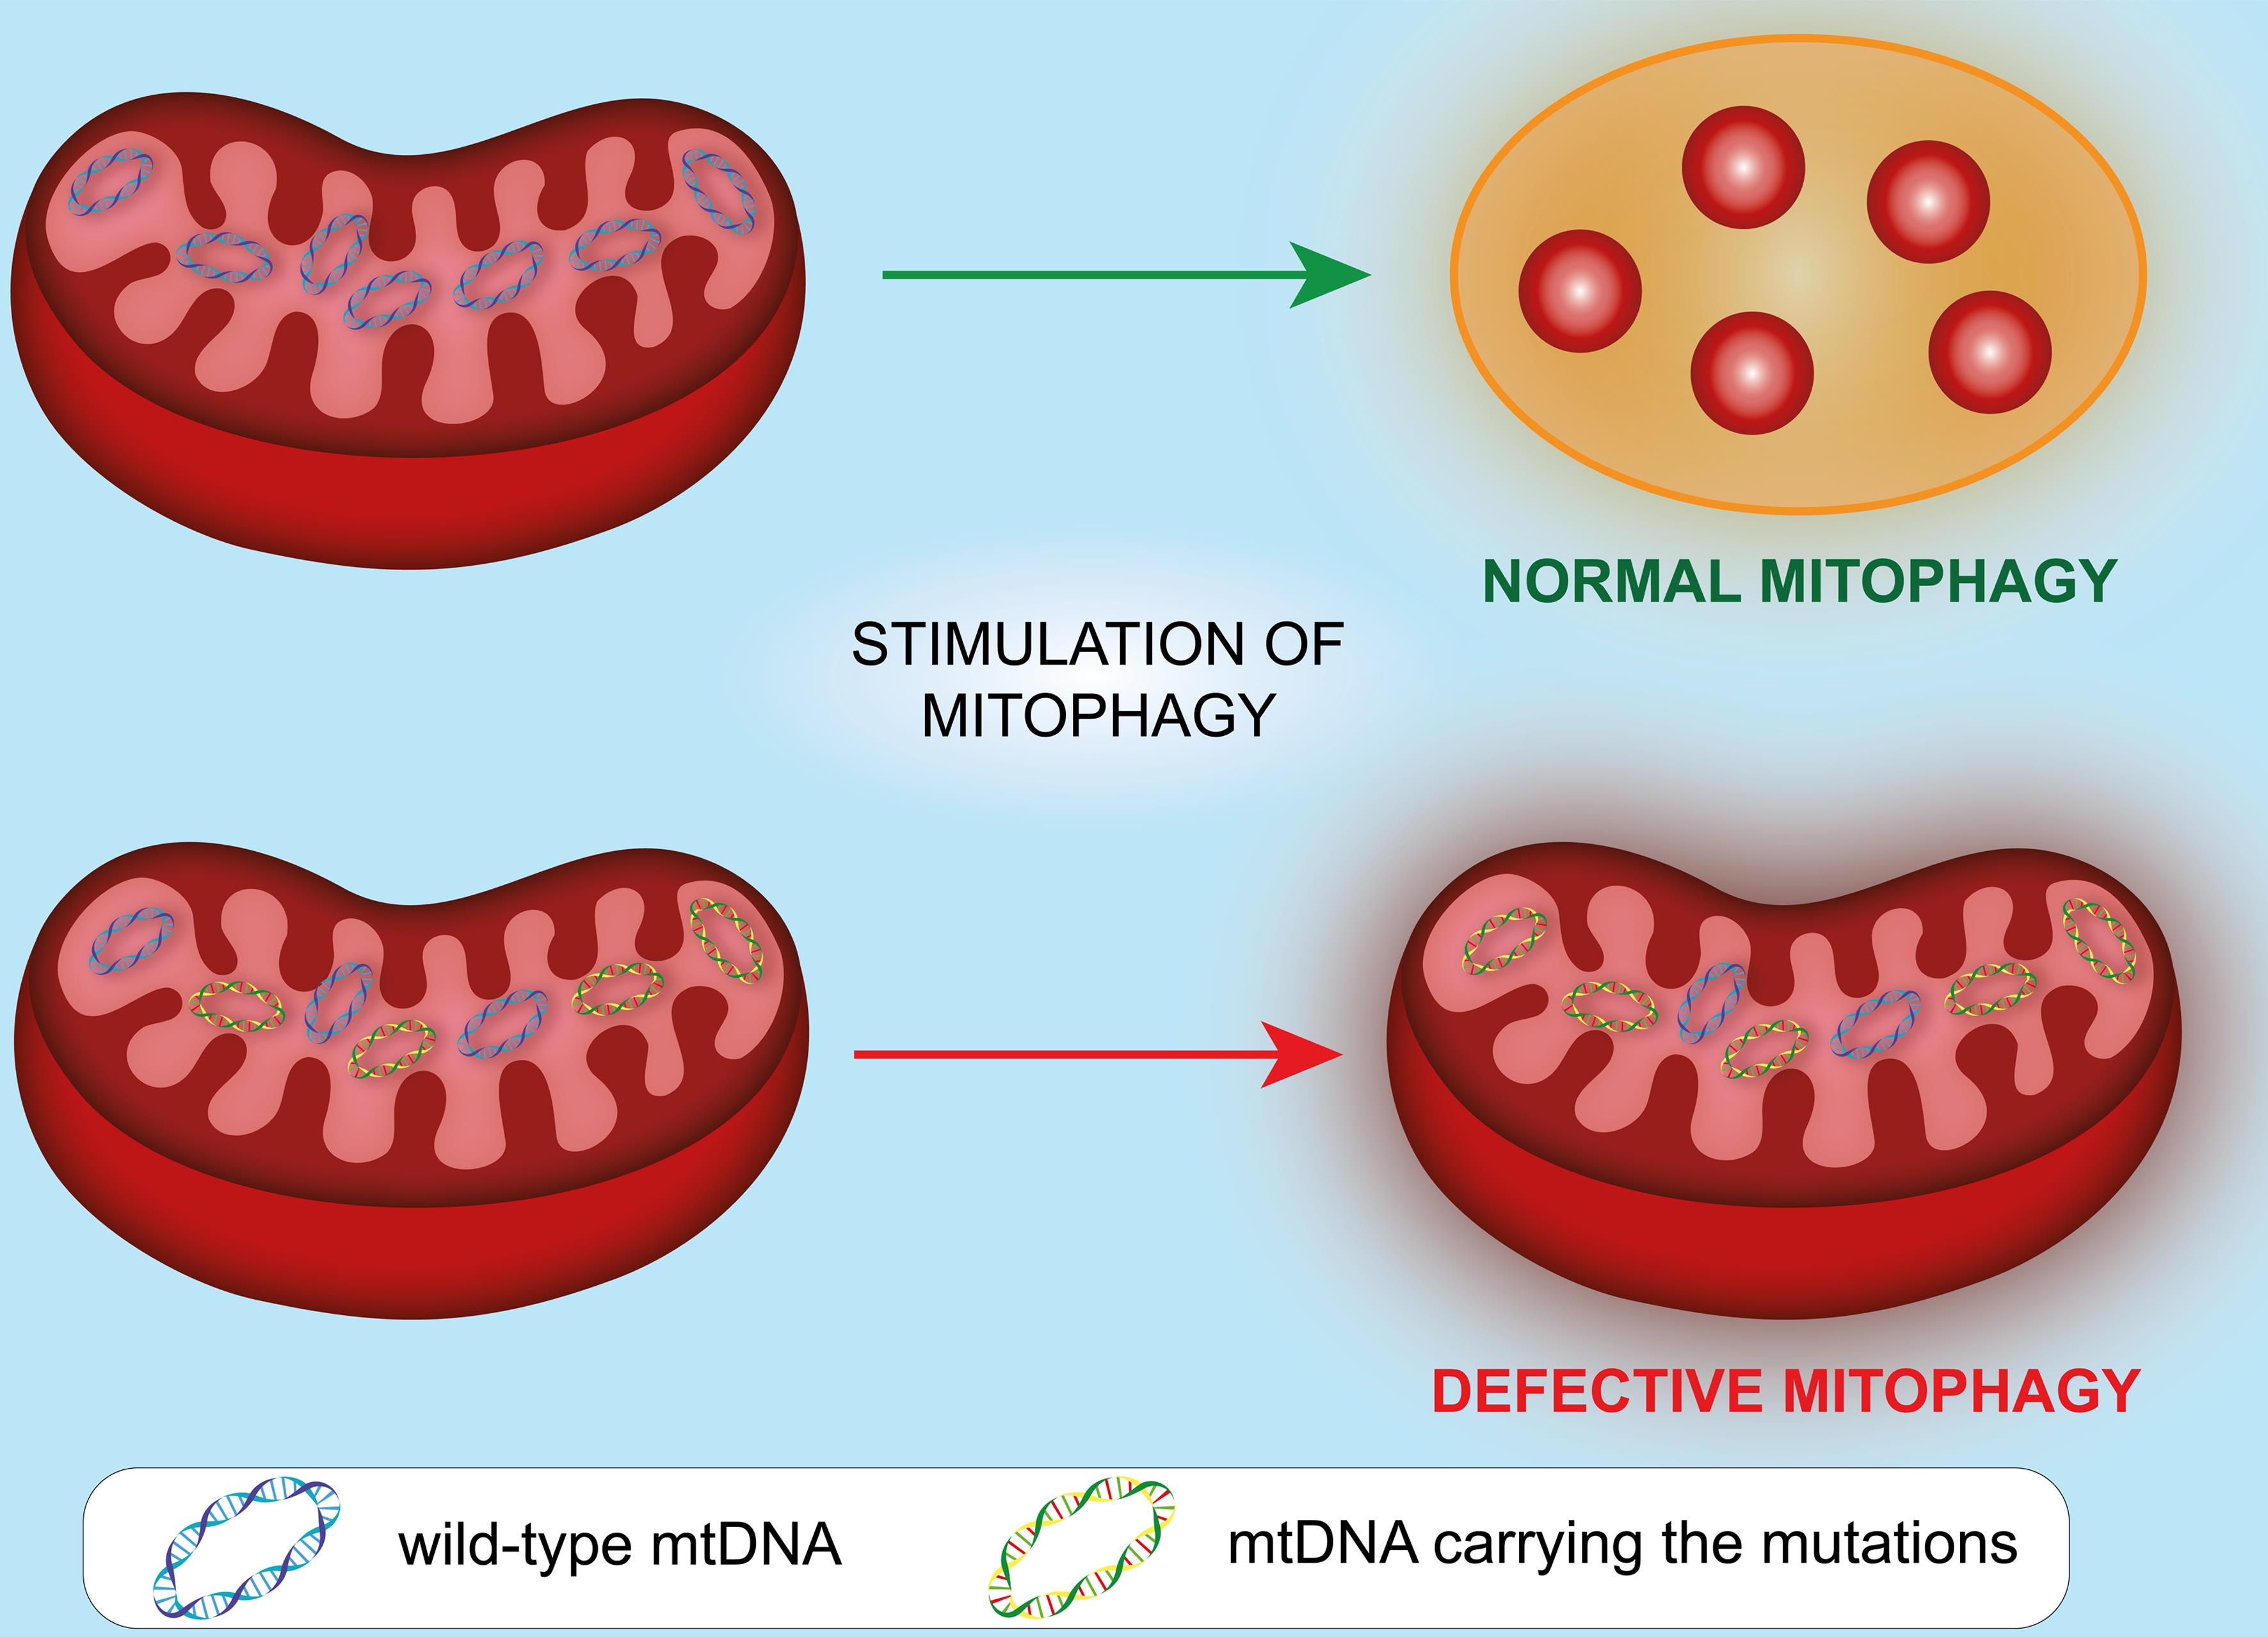 Hypothetical causal role of mutations in mitochondrial DNA in developing defective mitophagy that induces an excessive and continuous inflammatory response.